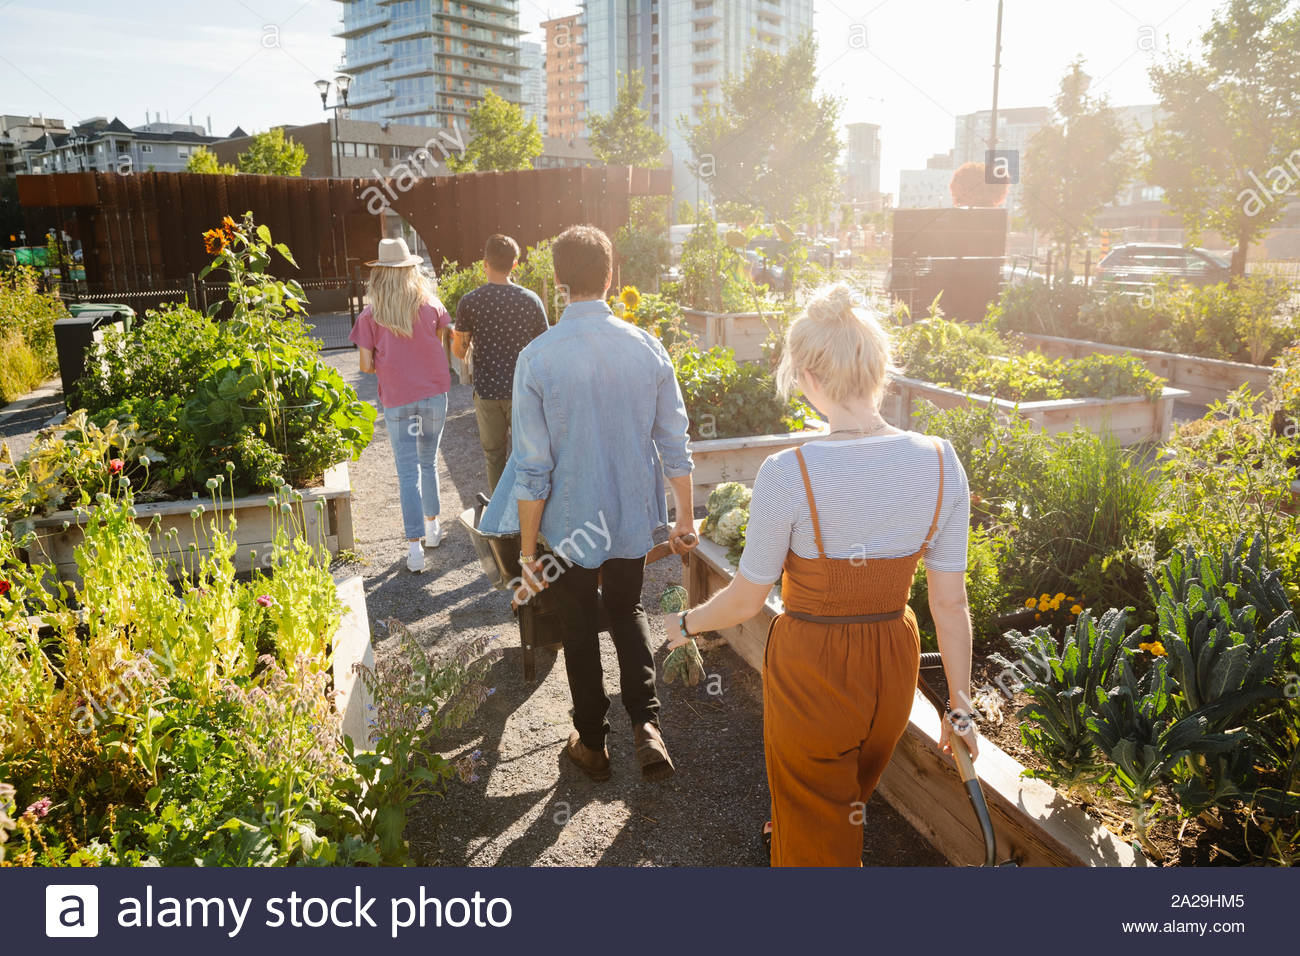 Young adult friends walking in sunny, urban community garden Stock Photo